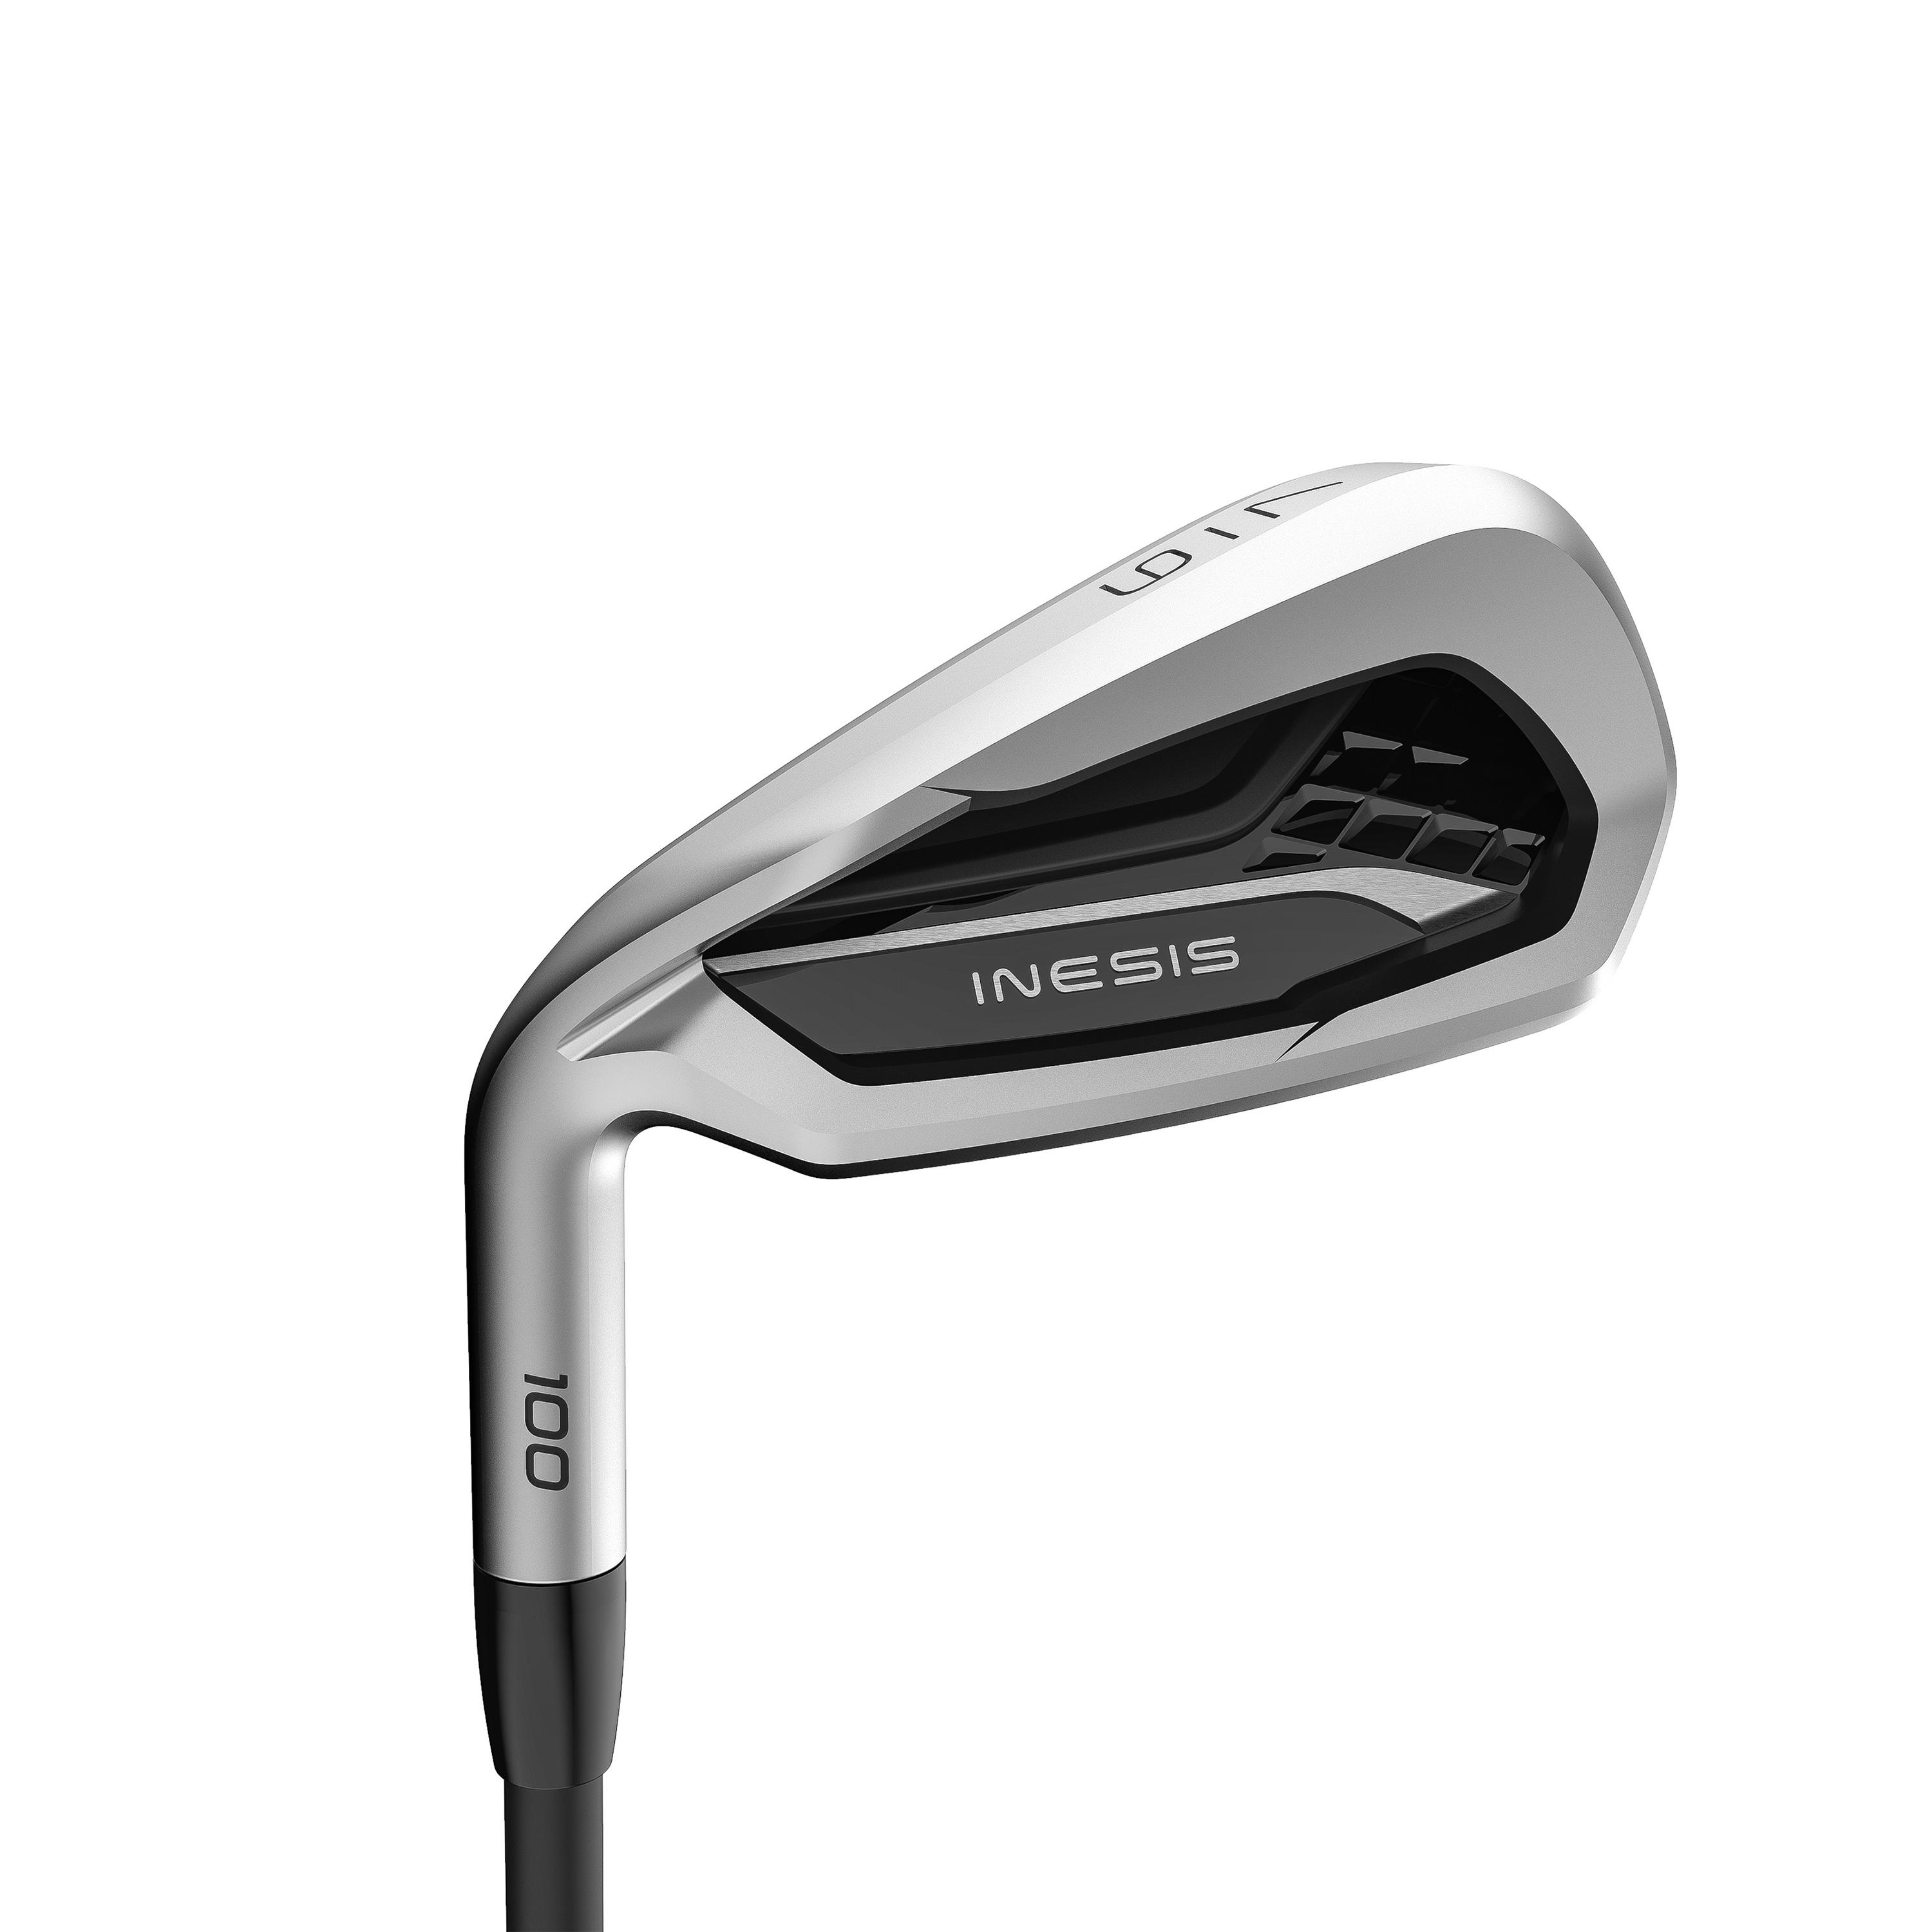 INESIS ADULT INDIVIDUAL GOLF IRON 100 LEFT HANDED SIZE 2 GRAPHITE - INESIS 100